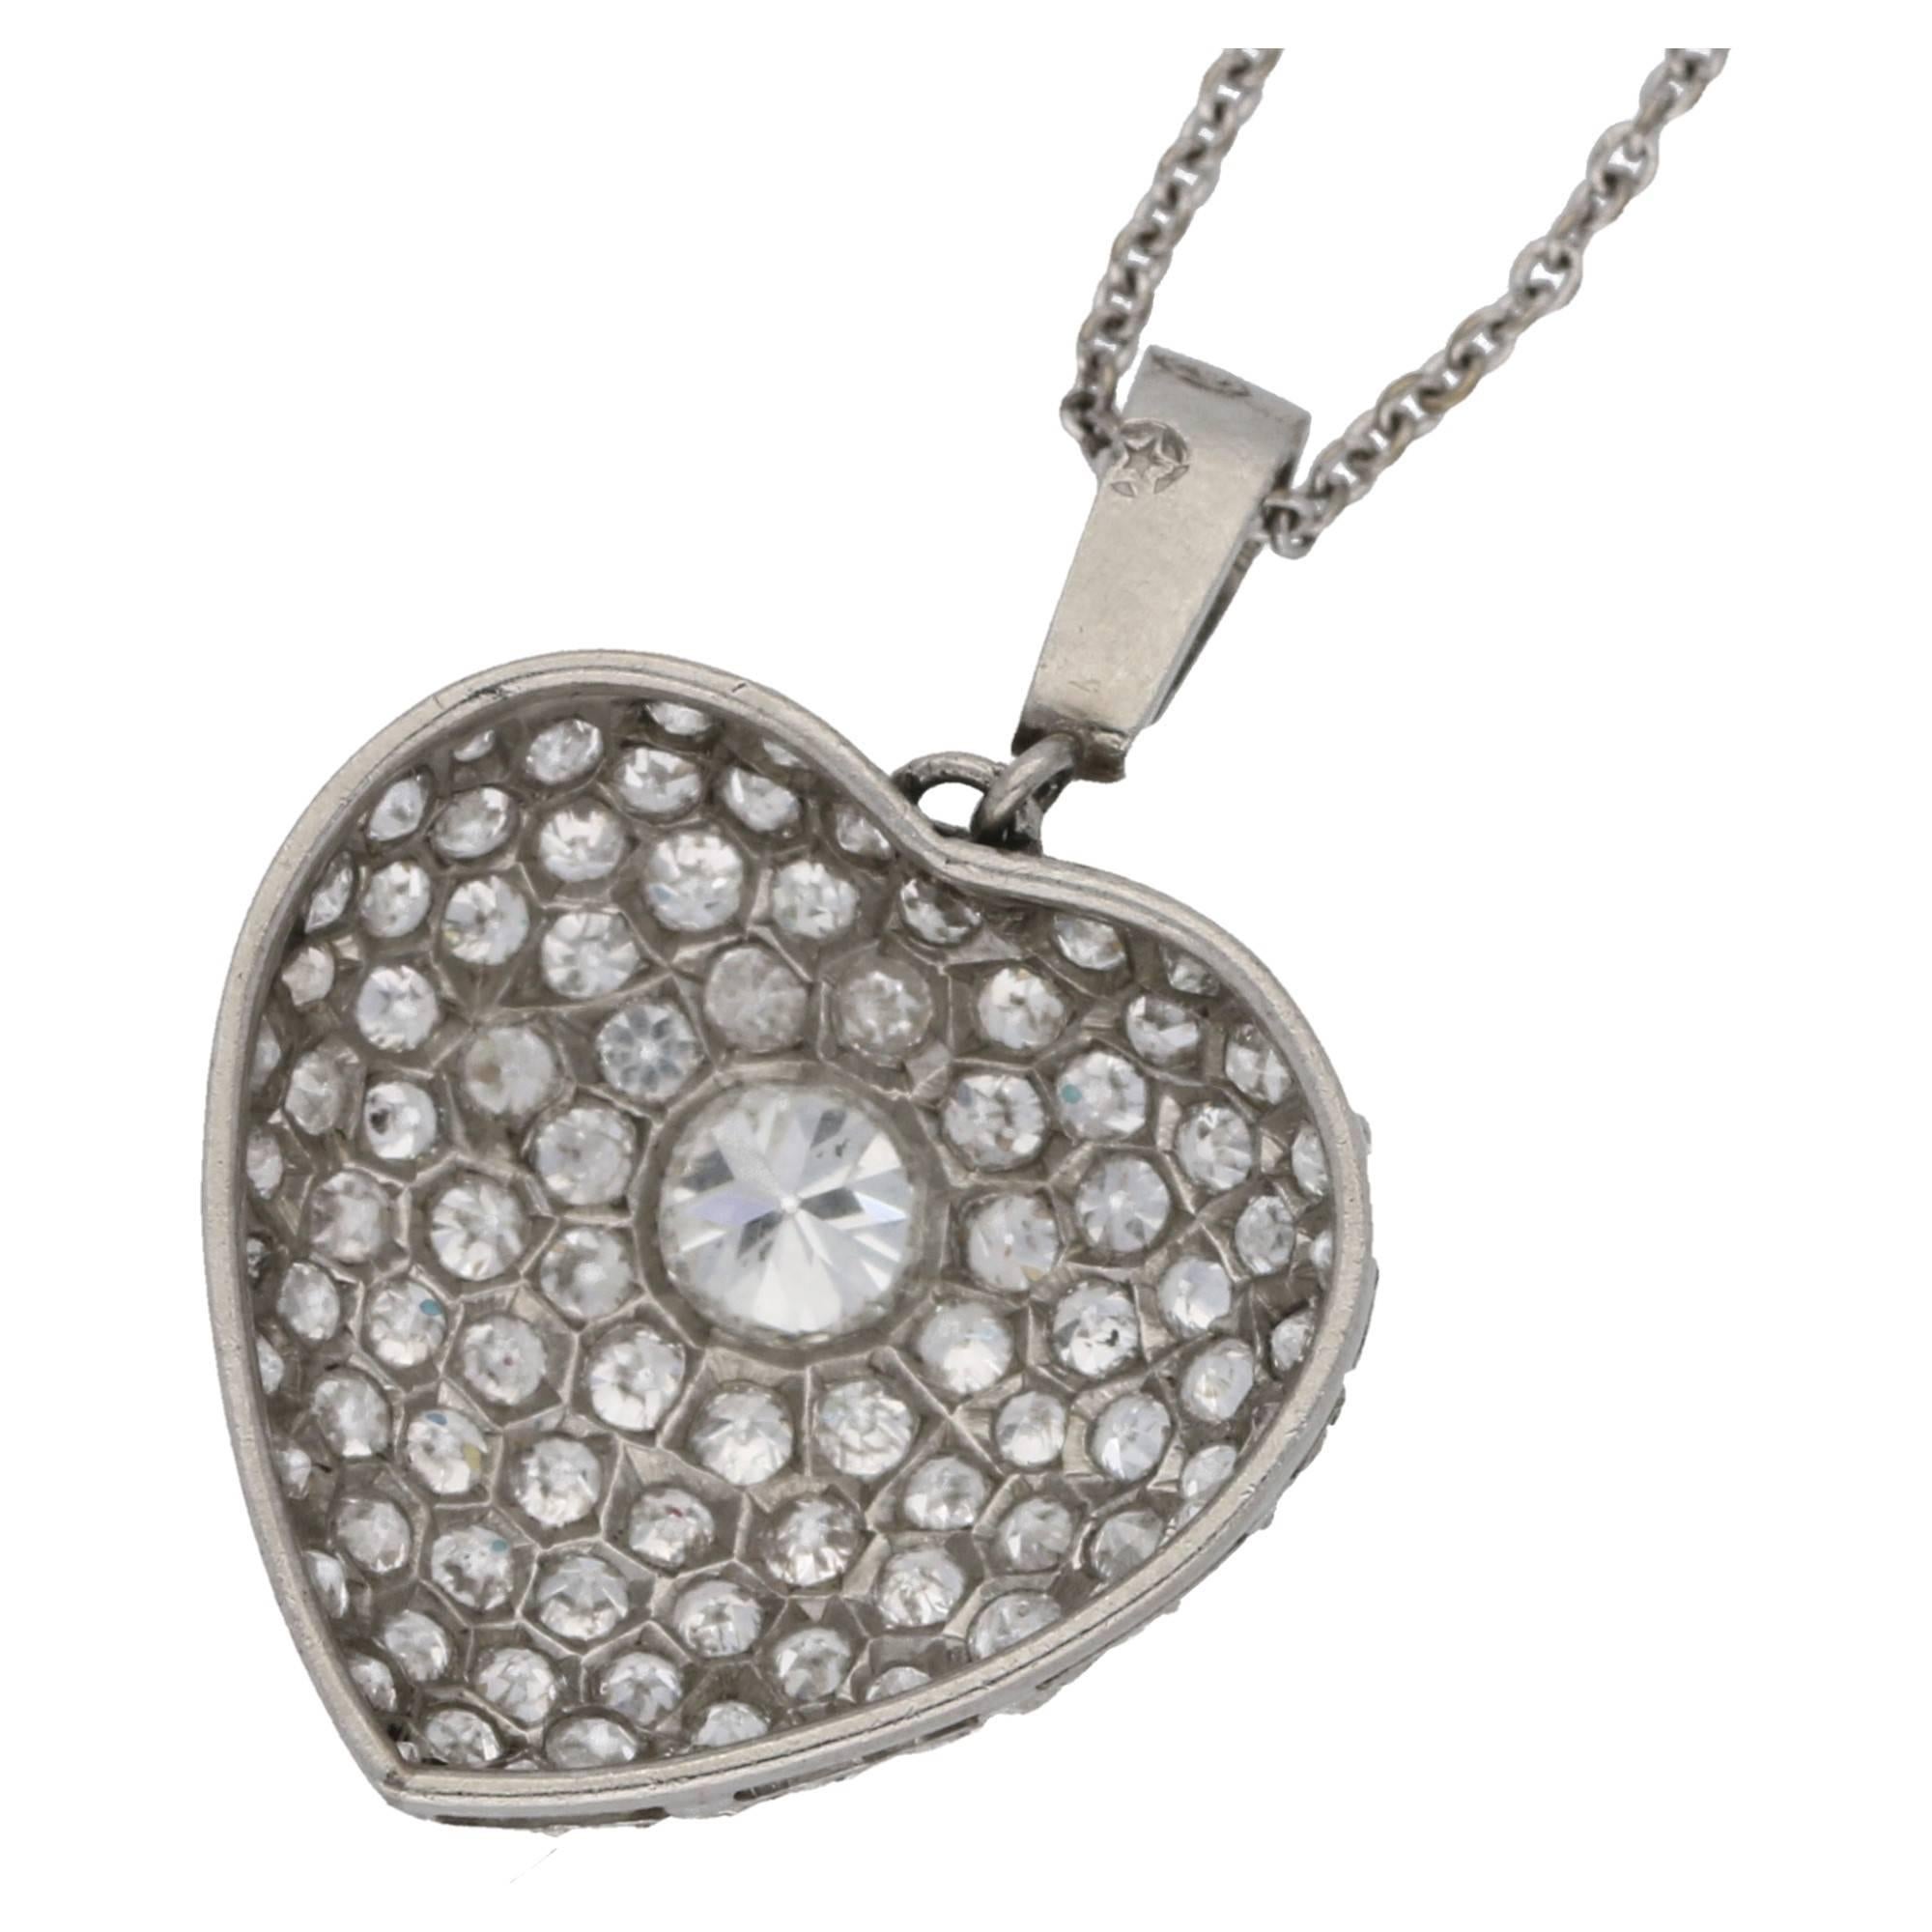 An exquisite diamond heart pendant set in platinum from the Edwardian era. The heart is set with an incredible assortment of old European cut diamonds pave set around a larger central diamond. The pendant is suspended on a diamond set bale with a